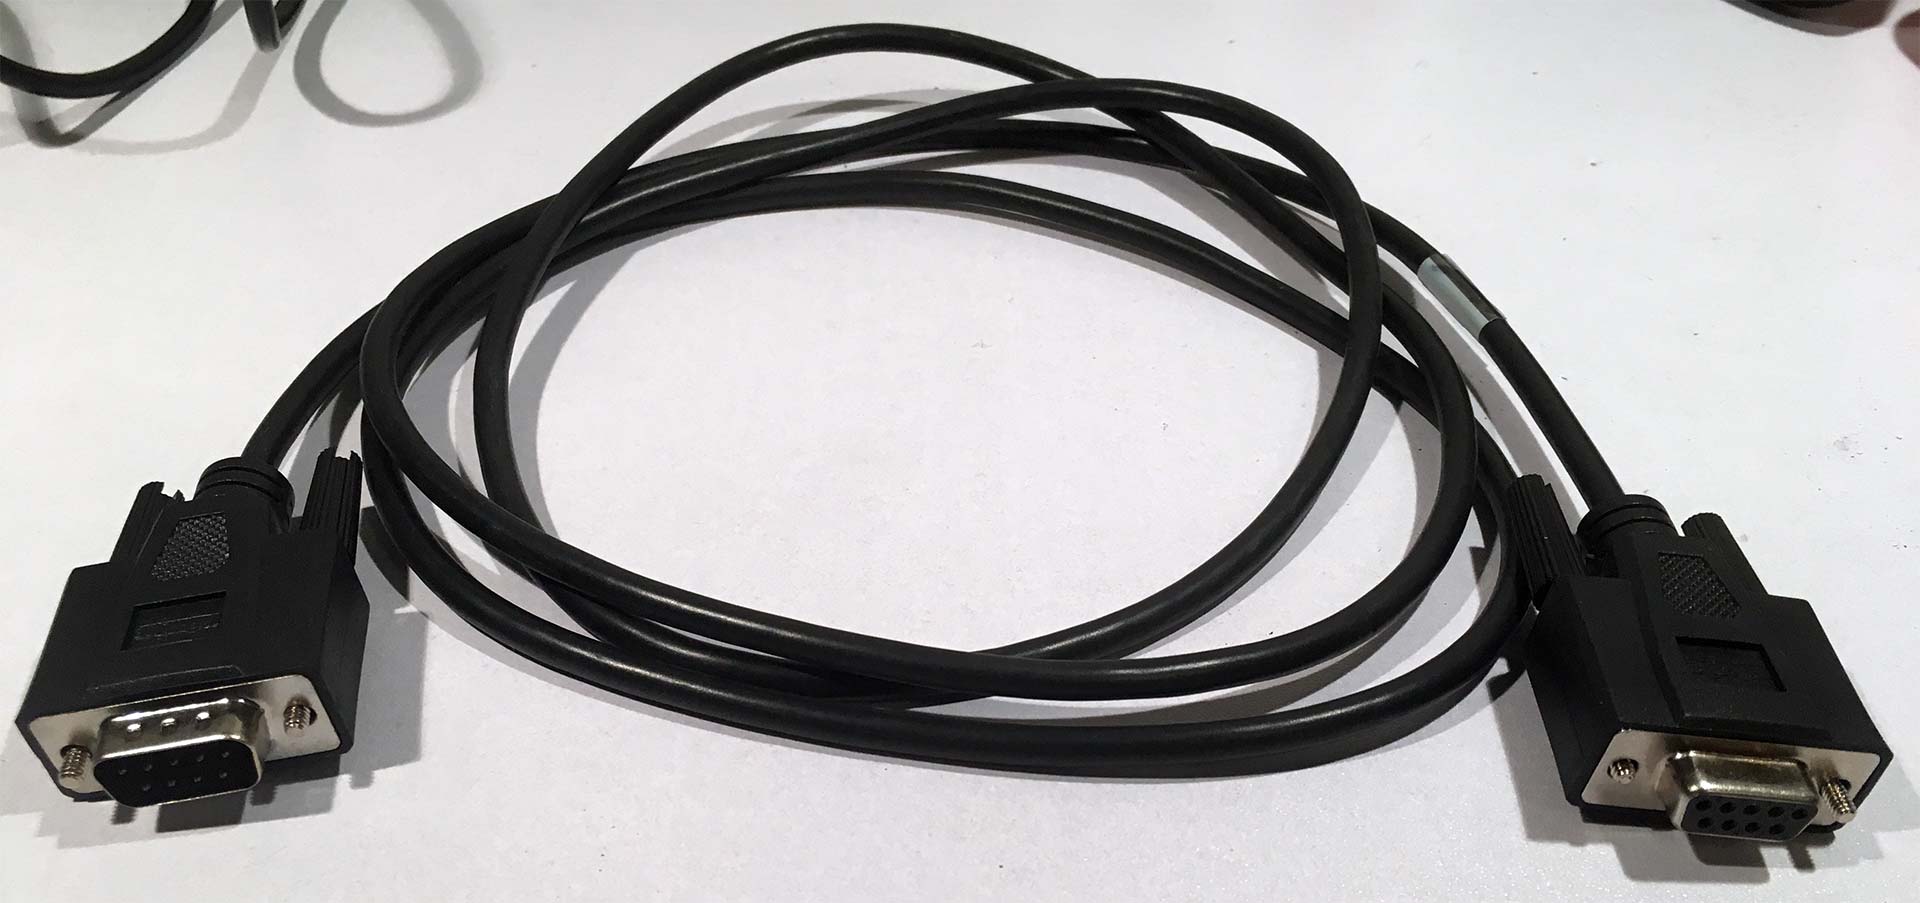 DB9 - serial cable.